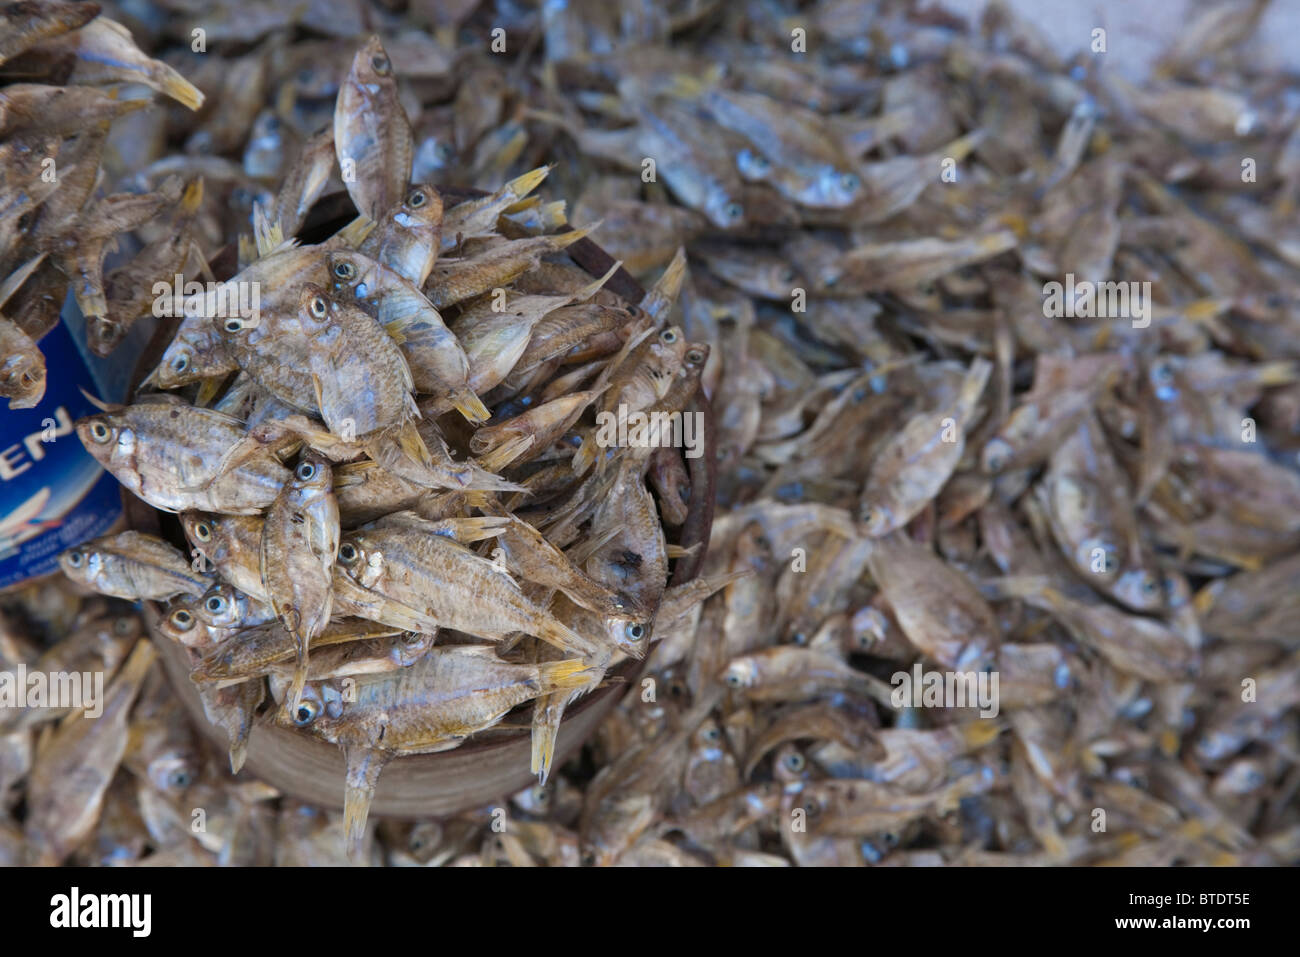 Close-up view of large quantity of small dried fishes for sale Stock Photo